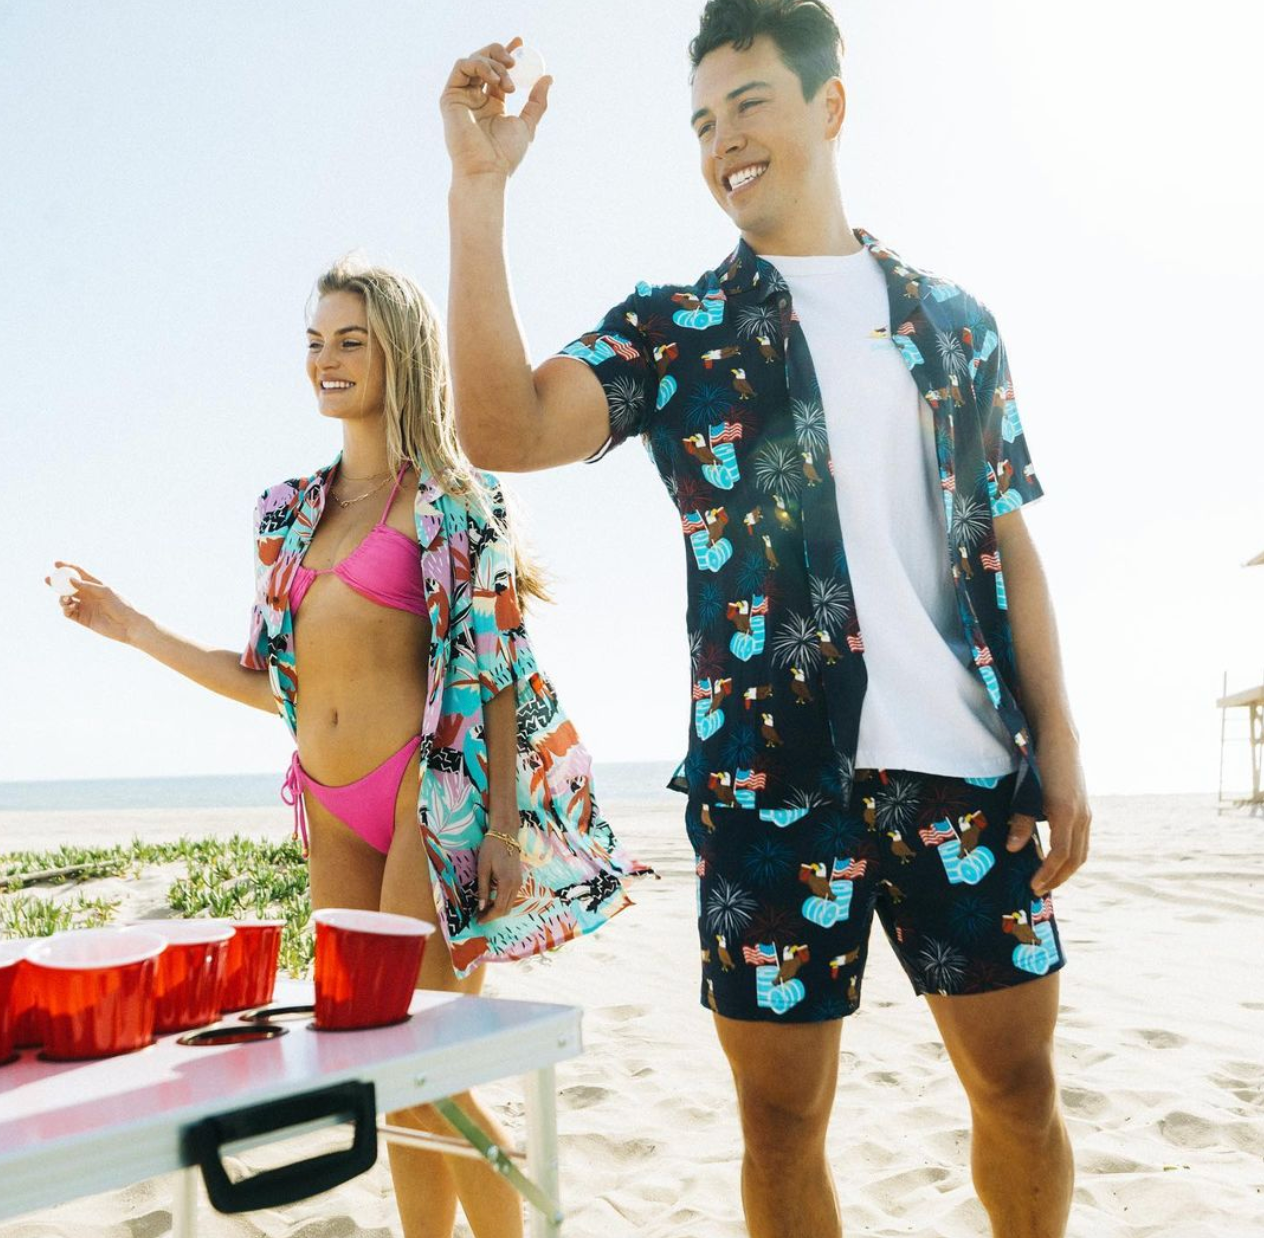 A man and woman playing beer pong at a beach